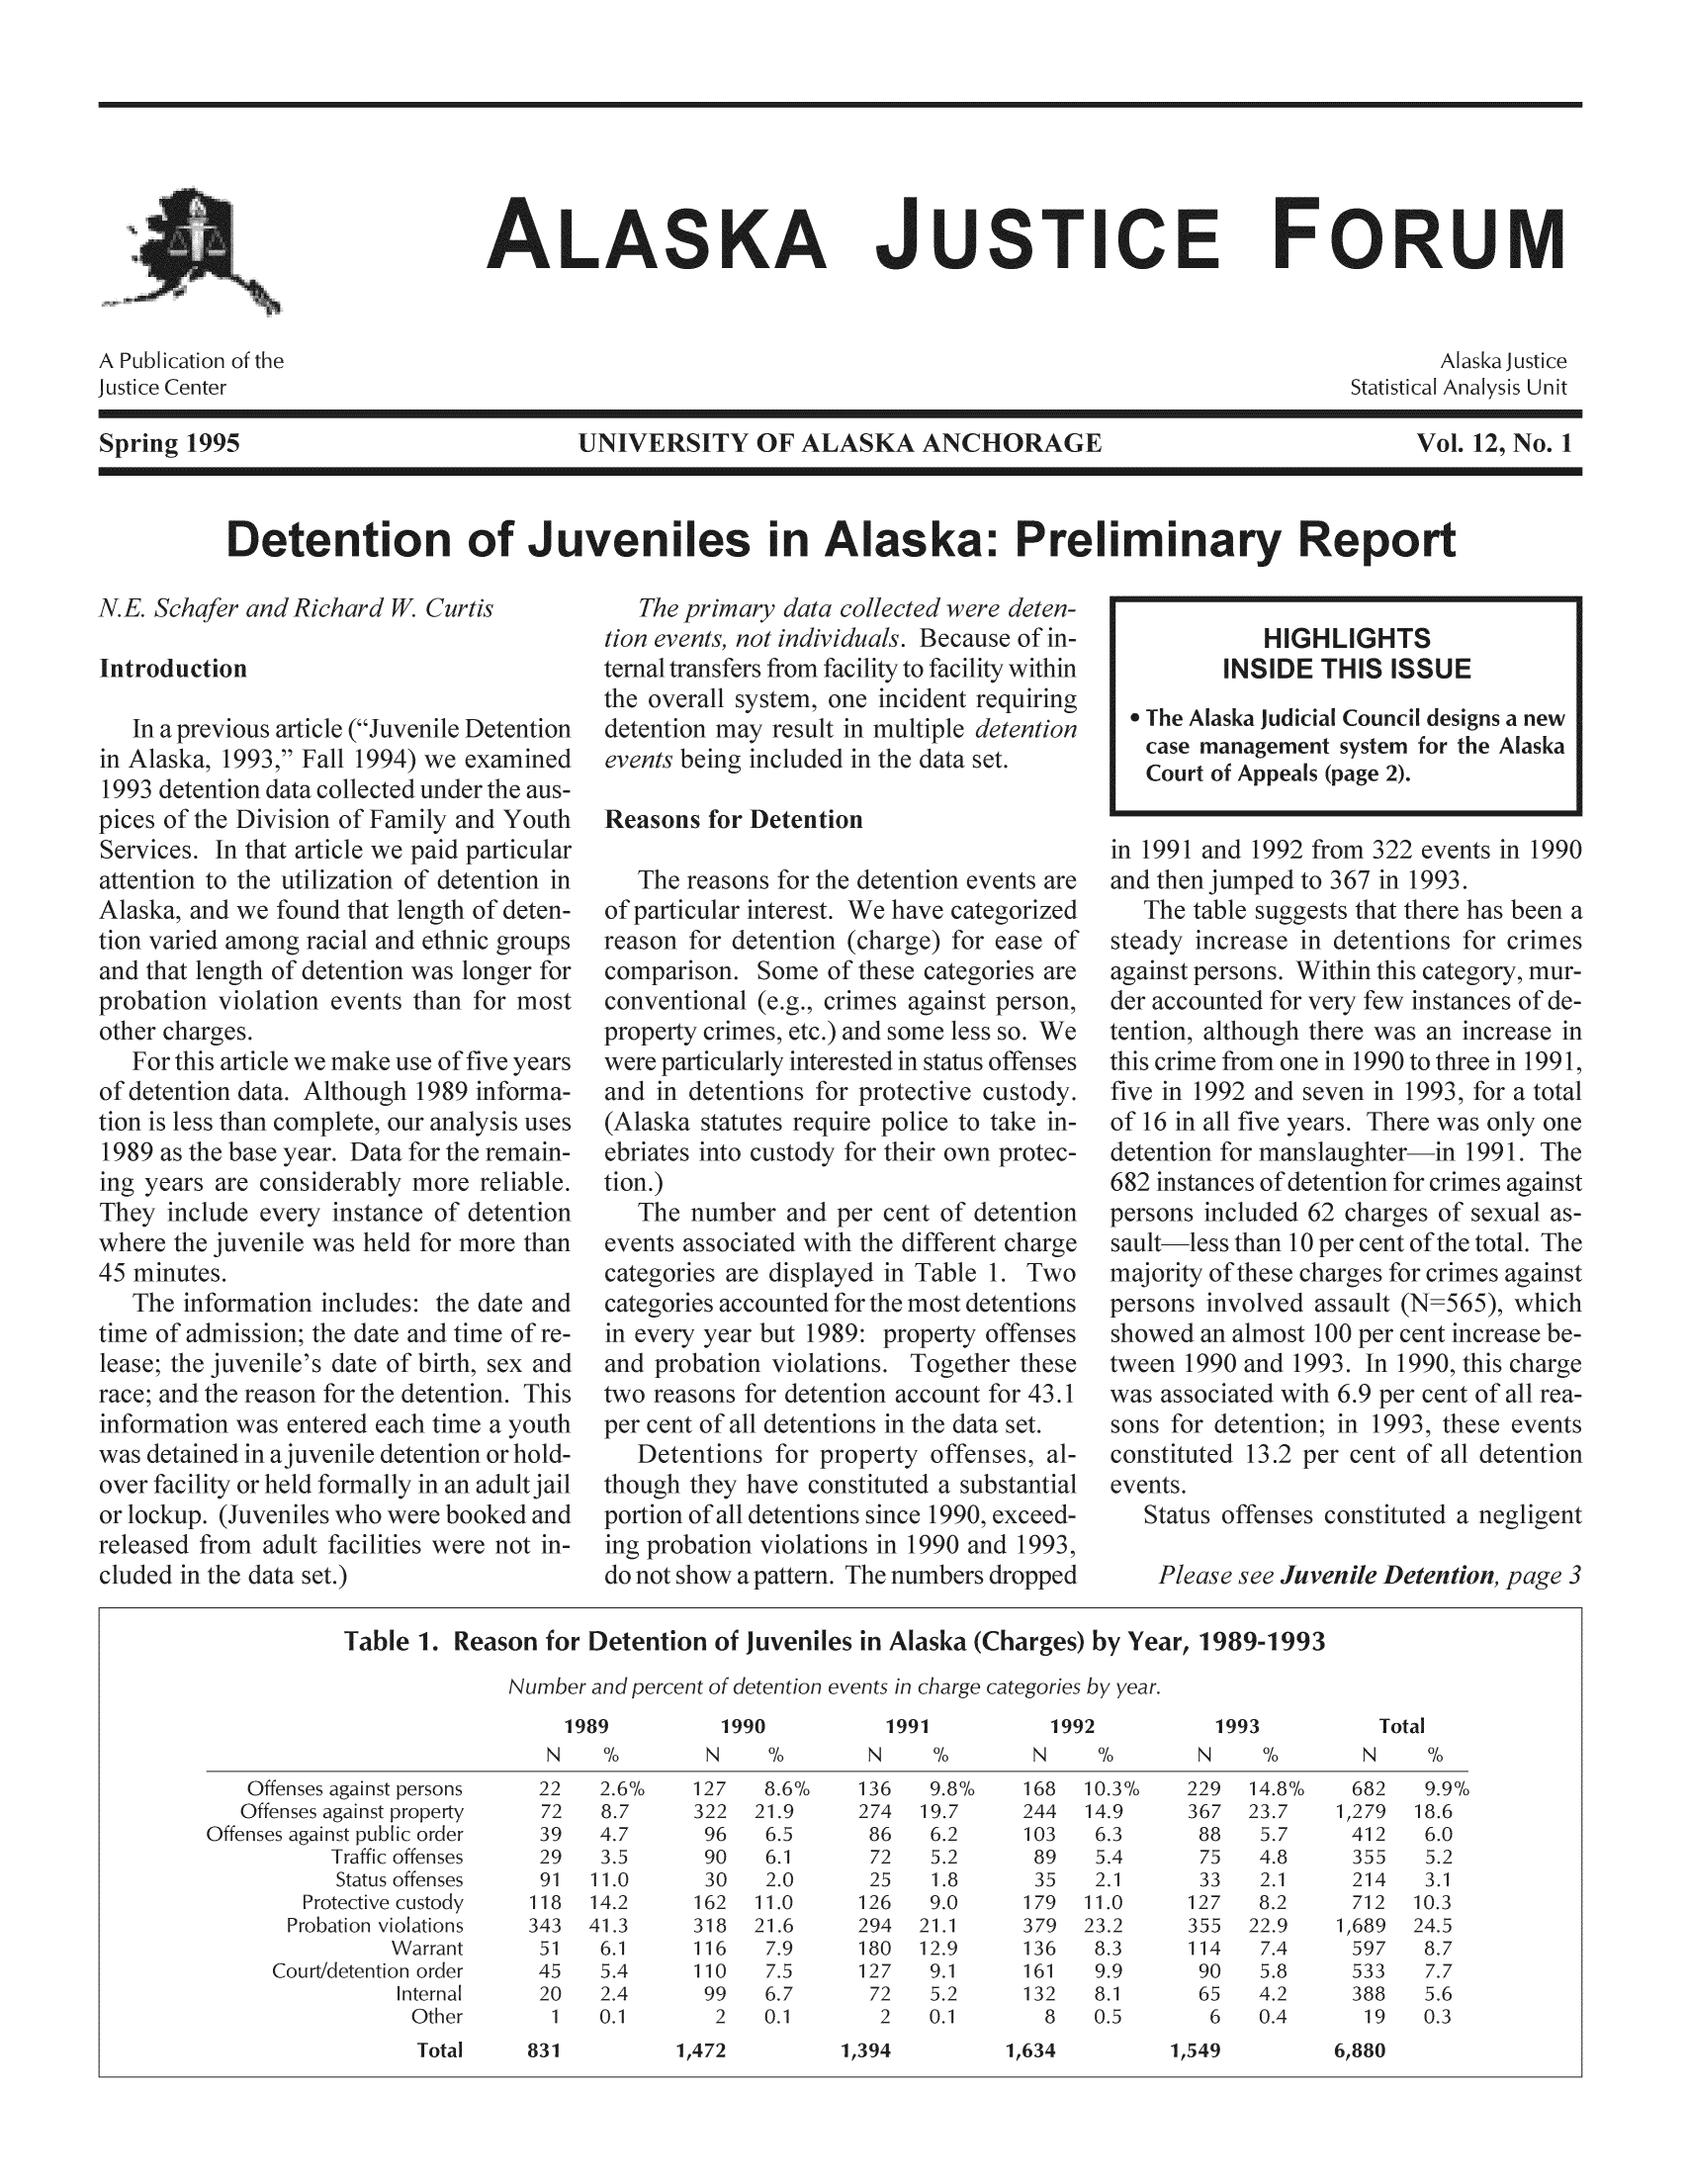 handle is hein.journals/aljufor12 and id is 1 raw text is: ALASKA JUSTICE FORUMUNIVERSITY OF ALASKA ANCHORAGI7ol. 12, No. 1Detention of Juveniles in Alaska: Preliminary ReportA transfers from facili    to fa1993, Fall 1994Reasons for Detcgroupsger foiuse of fi-h 1989 iitiolmpe1993)fpaparison. Some ofpropinst pless soatus offfor prI for very fef       99this crime froifive in 1992,of 16 in all filper cent ofith the differe199C1993, ft1991ghteriin 1991per cent of d for the1989: pfofffer tforfor property offeQve constituted a st4e~ntionn, Vinve 1990(1990mb(patt=565)1990 and 1993. In 199(sociated with 6.9 per cc)r detention; in 1993,uted 13.2 per cent of'4tt q   ffe199!)ppe? Juvenilition,Table 1. Reason for Detention of Jt19891990Alaska (in charge1991by Year, 1989-19931992199349         6,880Spring 1994atrod1cti1993pice,paid pzof deteiHIGHLIGHTSINSIDE THIS ISSUEhe Alaska Judicial Council desisacase management system for the AlaskaCourt ofAppeals (page 2).1989nplLf.I frper cent of)fllrpr